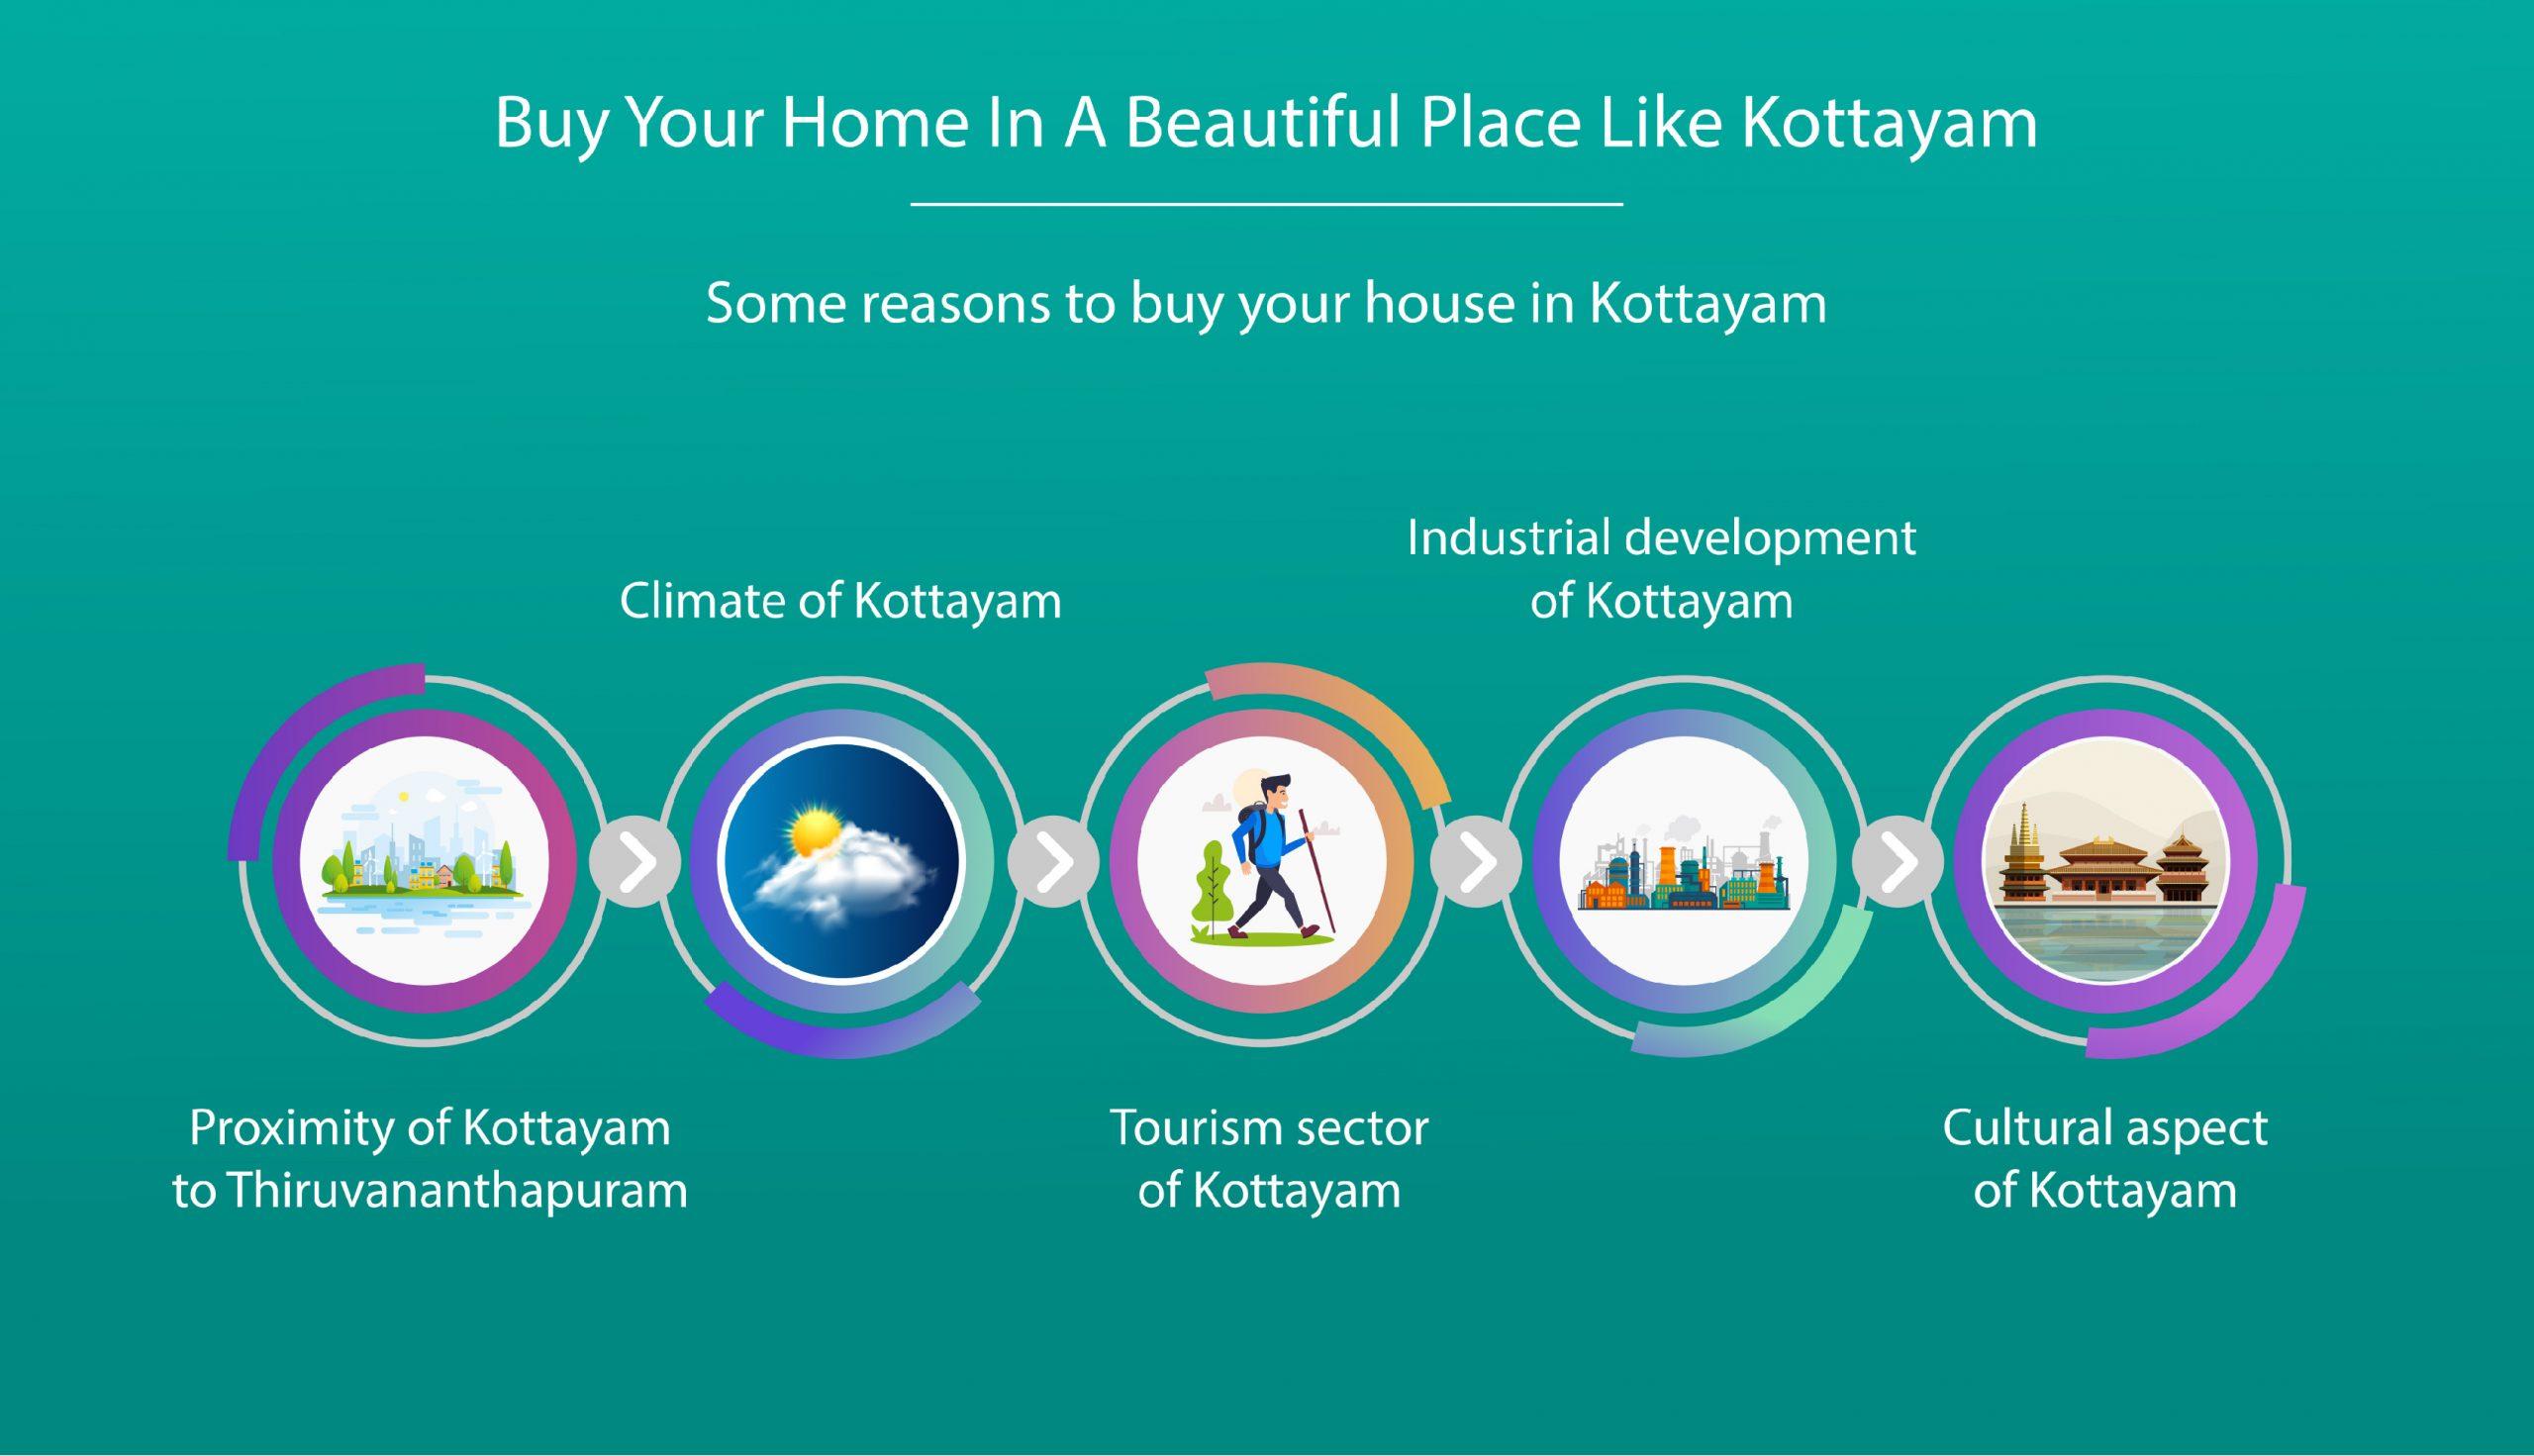 Buy Your Home In A Beautiful Place Like Kottayam